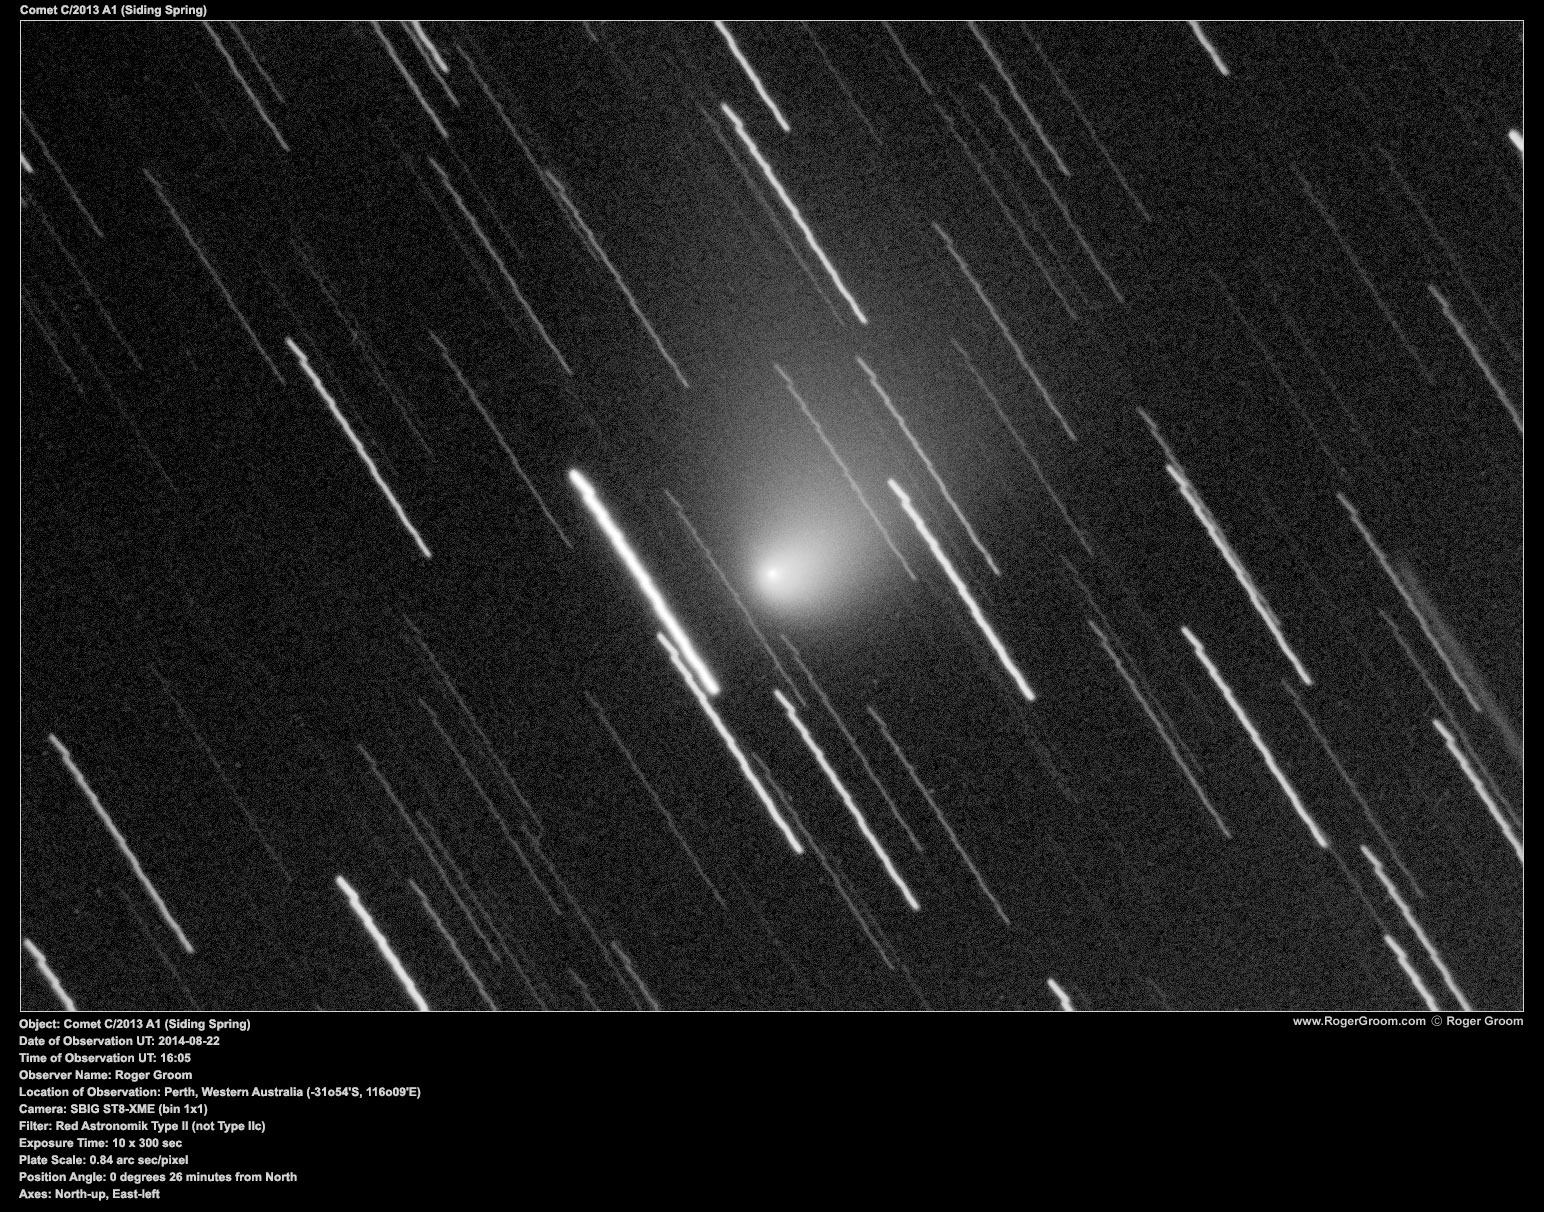 Object: Comet C/2013 A1 (Siding Spring) Date of Observation UT: 2014-08-22 Time of Observation UT: 16:05 Observer Name: Roger Groom Location of Observation: Perth, Western Australia (-31o54'S, 116o09'E) Camera: SBIG ST8-XME (bin 1x1) Filter: Red Astronomik Type II (not Type IIc) Exposure Time: 10 x 300 sec (sum combined) Plate Scale: 0.84 arc sec/pixel Position Angle: 0 degrees 26 minutes from North Axes: North-up, East-left